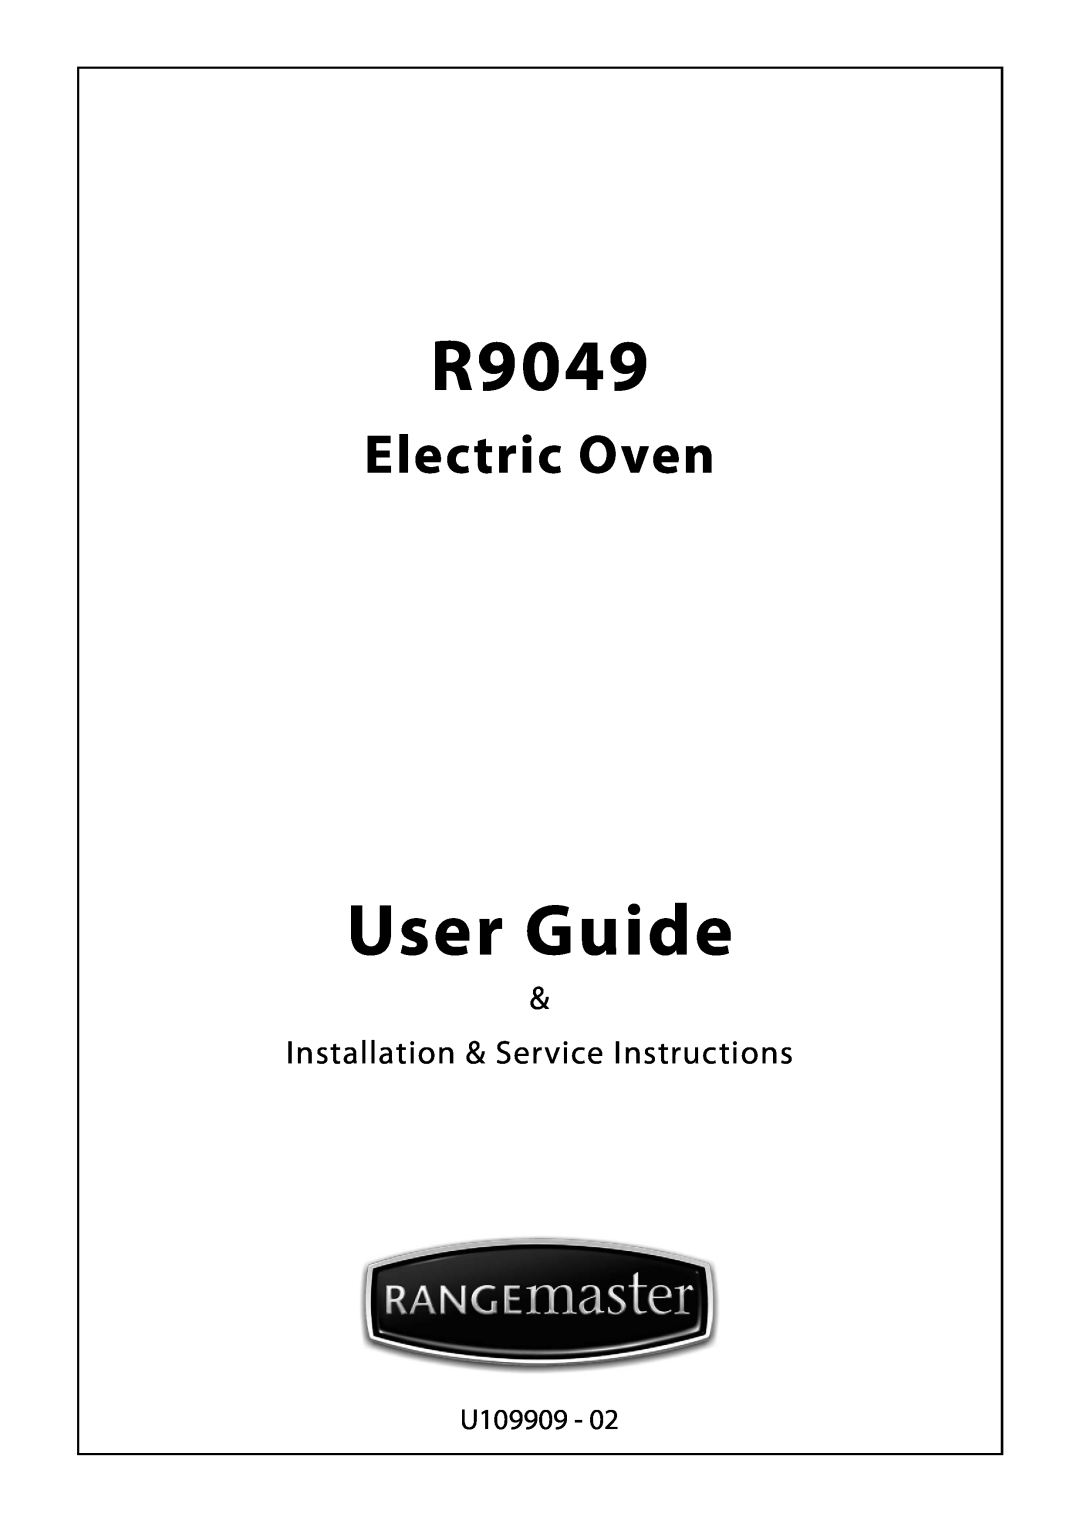 Rangemaster R9049 manual User Guide, Electric Oven, Installation & Service Instructions, U109909 